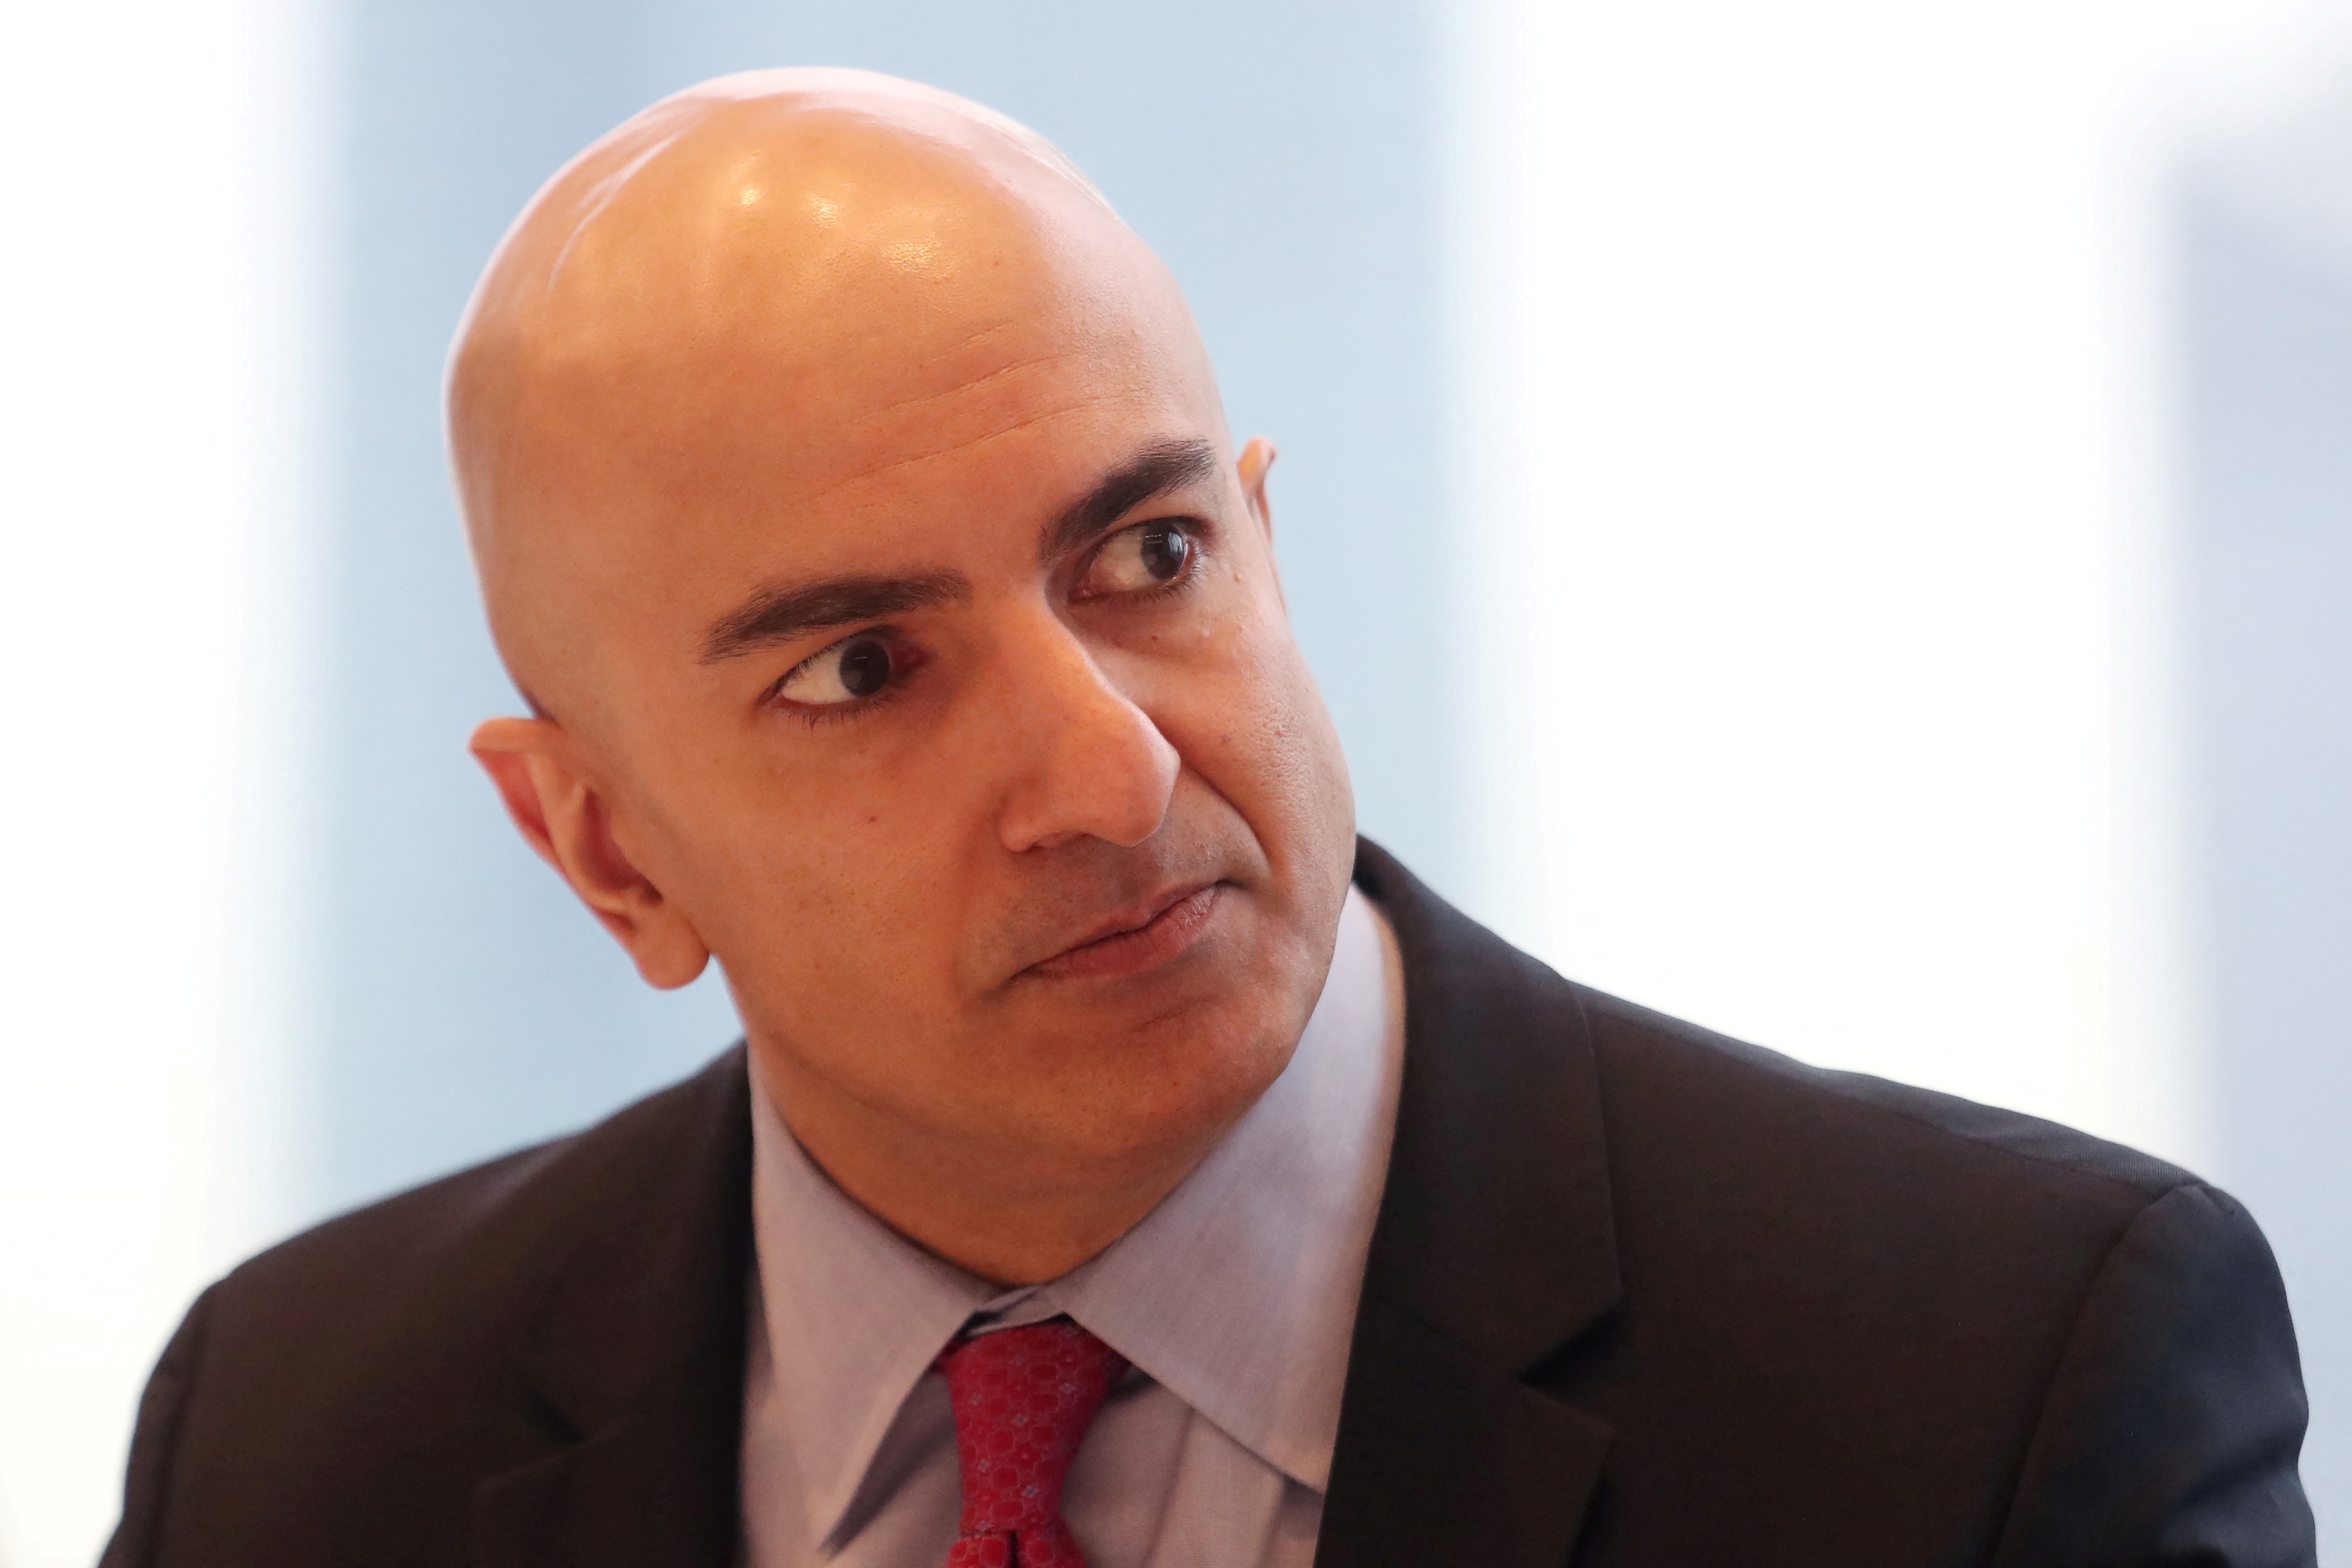 Minneapolis Federal Reserve President Neel Kashkari listens to a question during an interview in New York